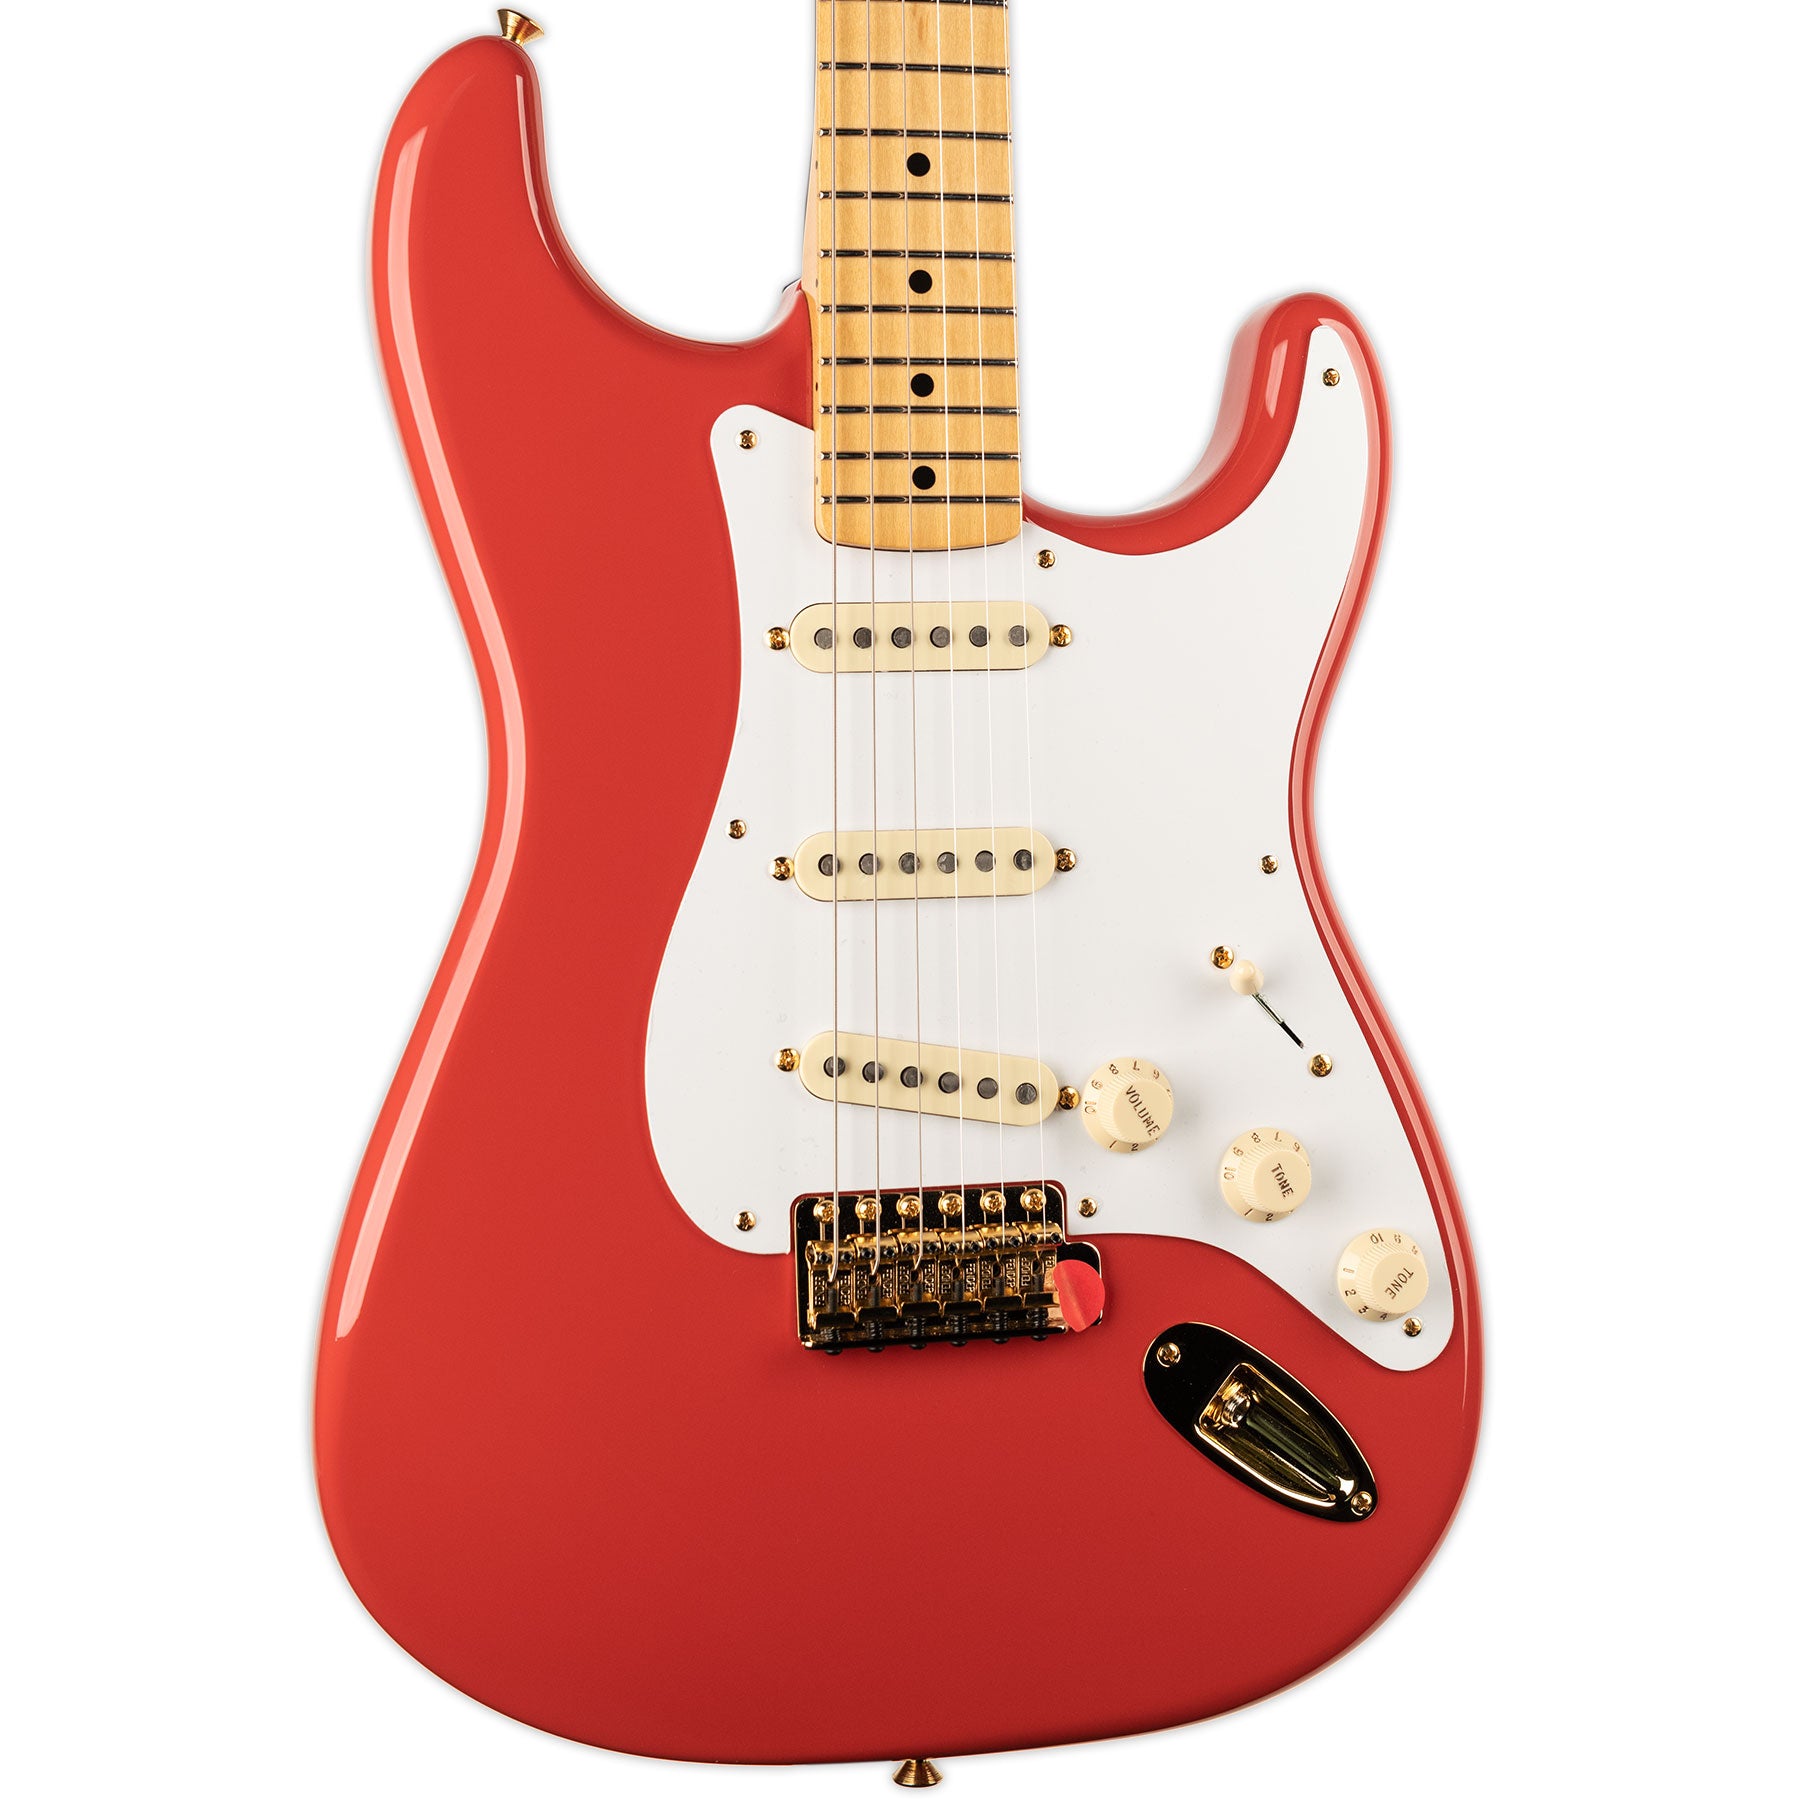 FENDER LIMITED EDITION 50'S STRATOCASTER FIESTA RED GOLD HARDWARE